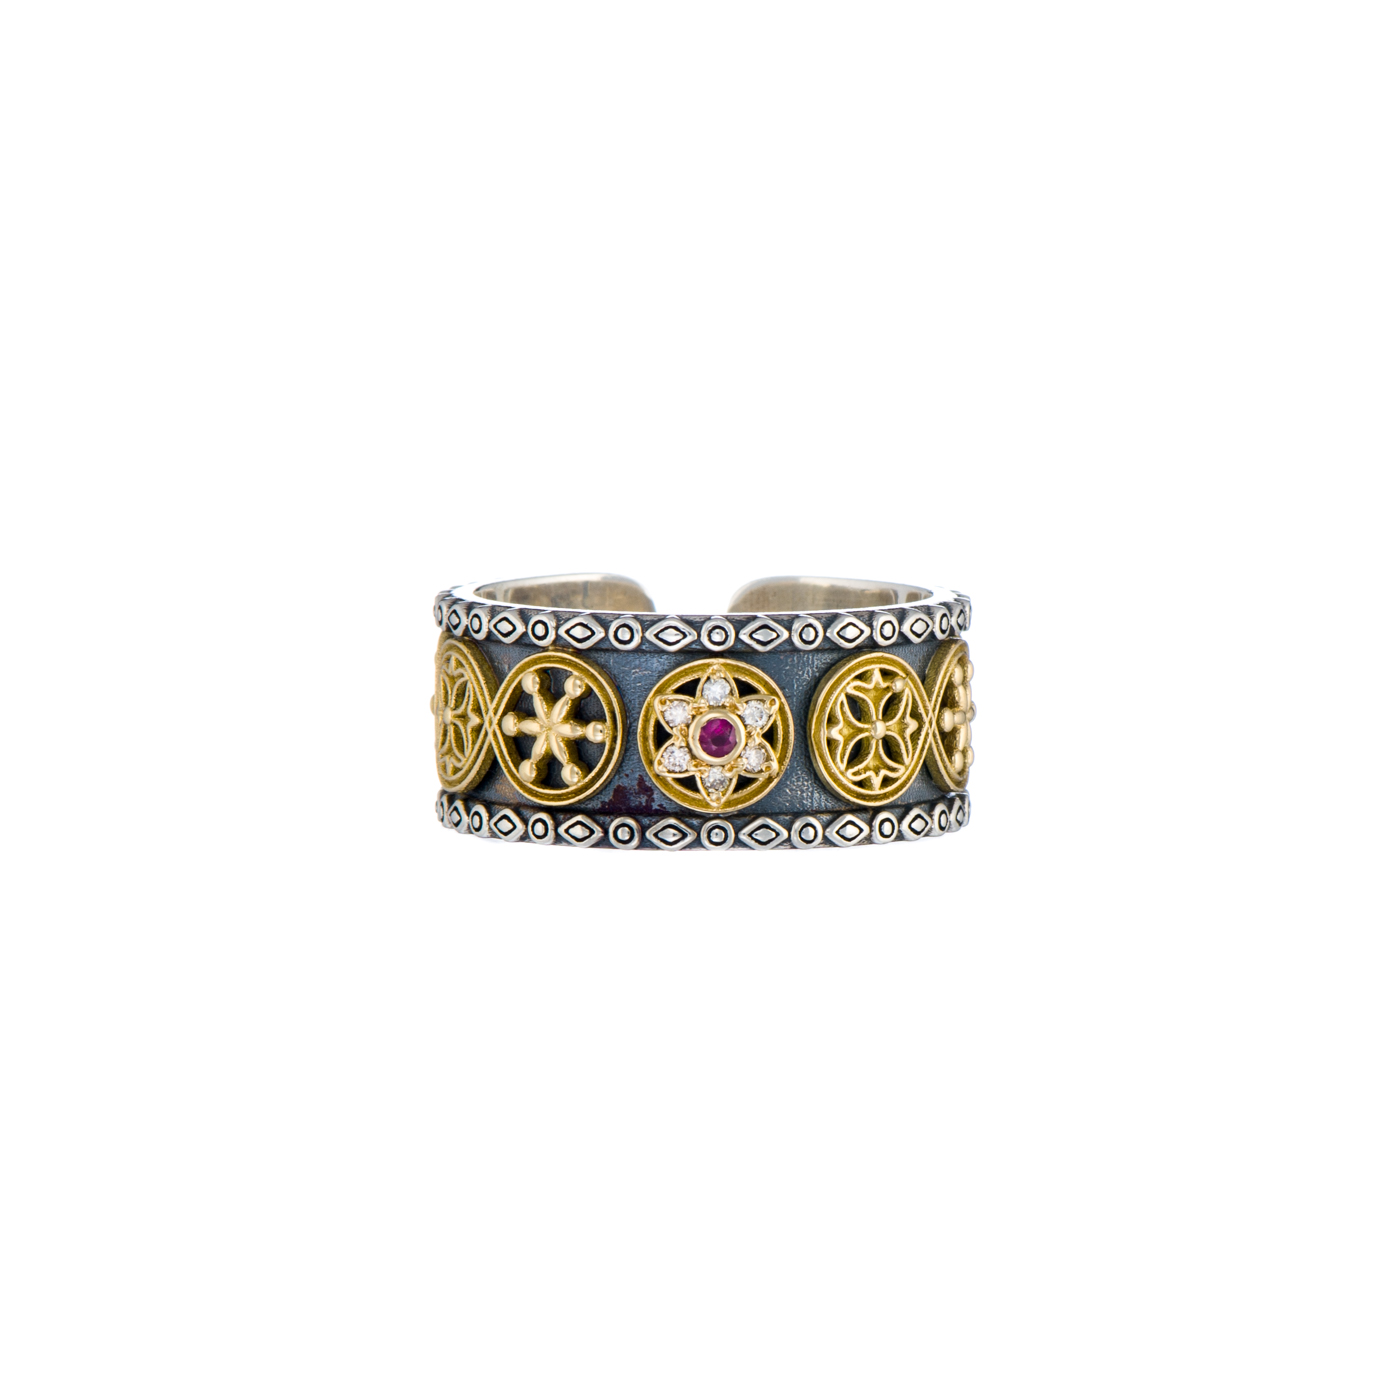 Symbol adjustable Ring in 18K Gold and Sterling silver with precious stones